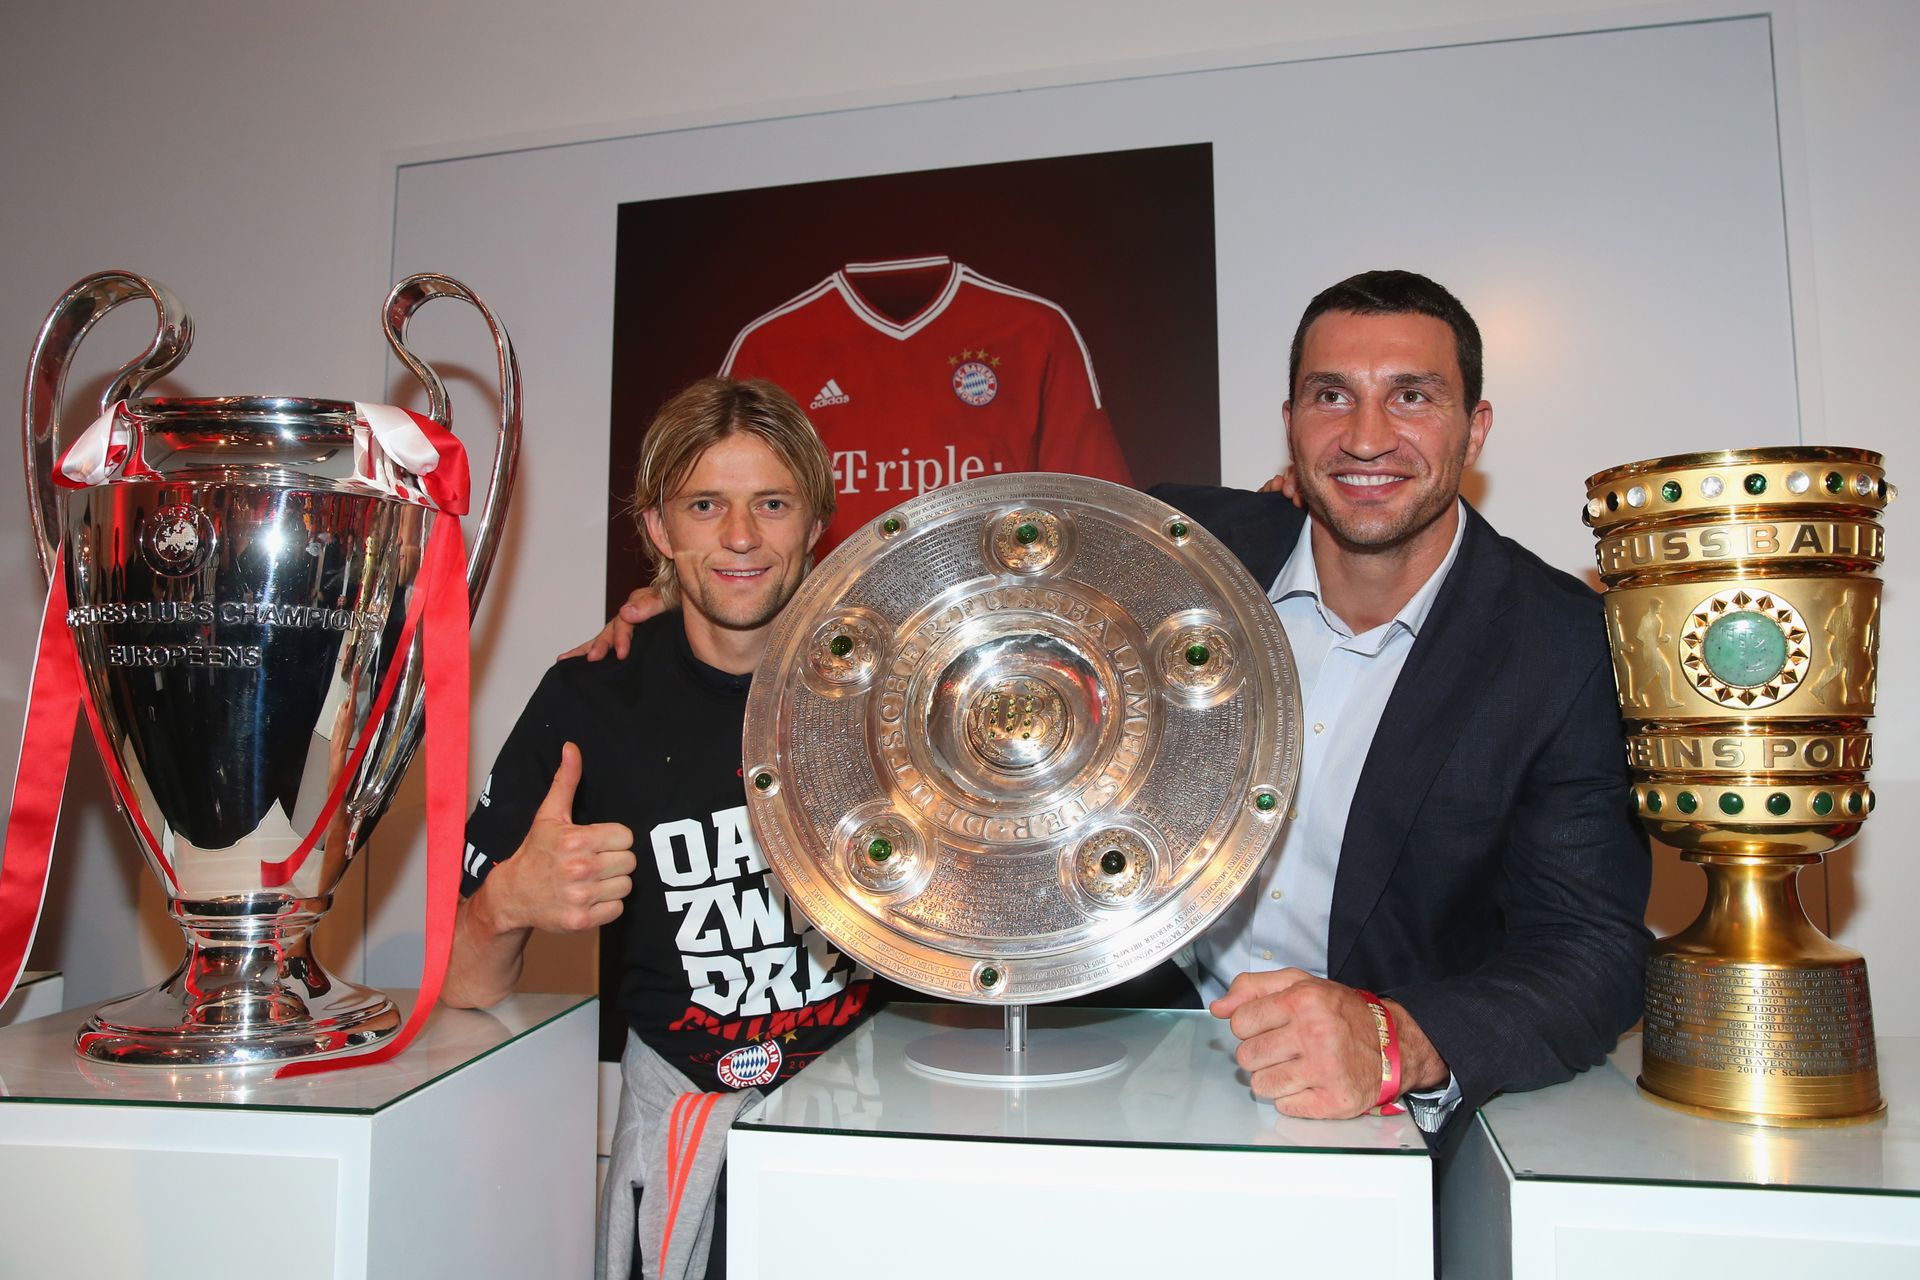 <p>                     Former world heavyweight champion Wladimir Klitschko revealed in 2013 that he had been a Bayern Munich fan for years and posed with trophies that year after the Bavarians won the treble.                   </p>                                      <p>                     The Ukrainian boxer won several fights in Munich and on one occasion, some of Bayern's players came to watch him in action. When Klitschko retired in 2017, the Bundesliga giants posted a good luck message on social media.                   </p>